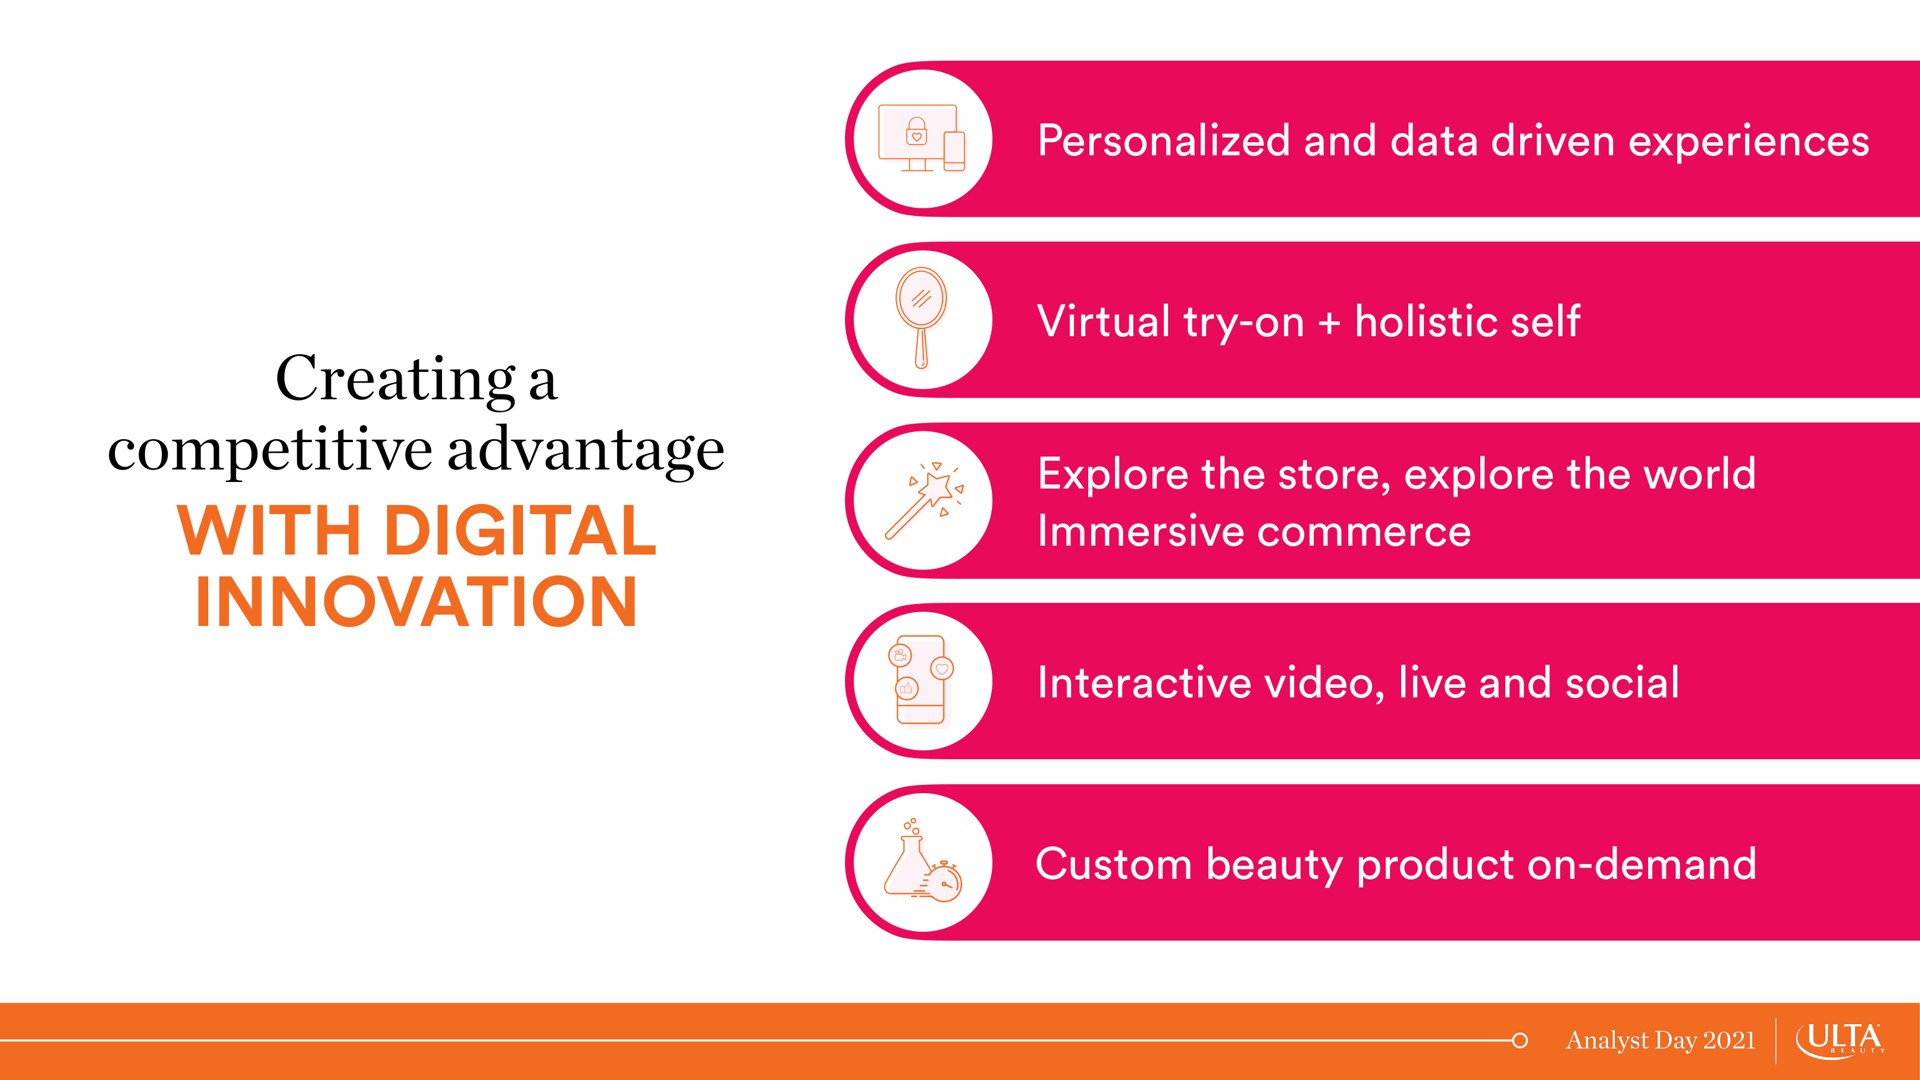 creating a competitive advantage with digital innovation | Ulta Beauty